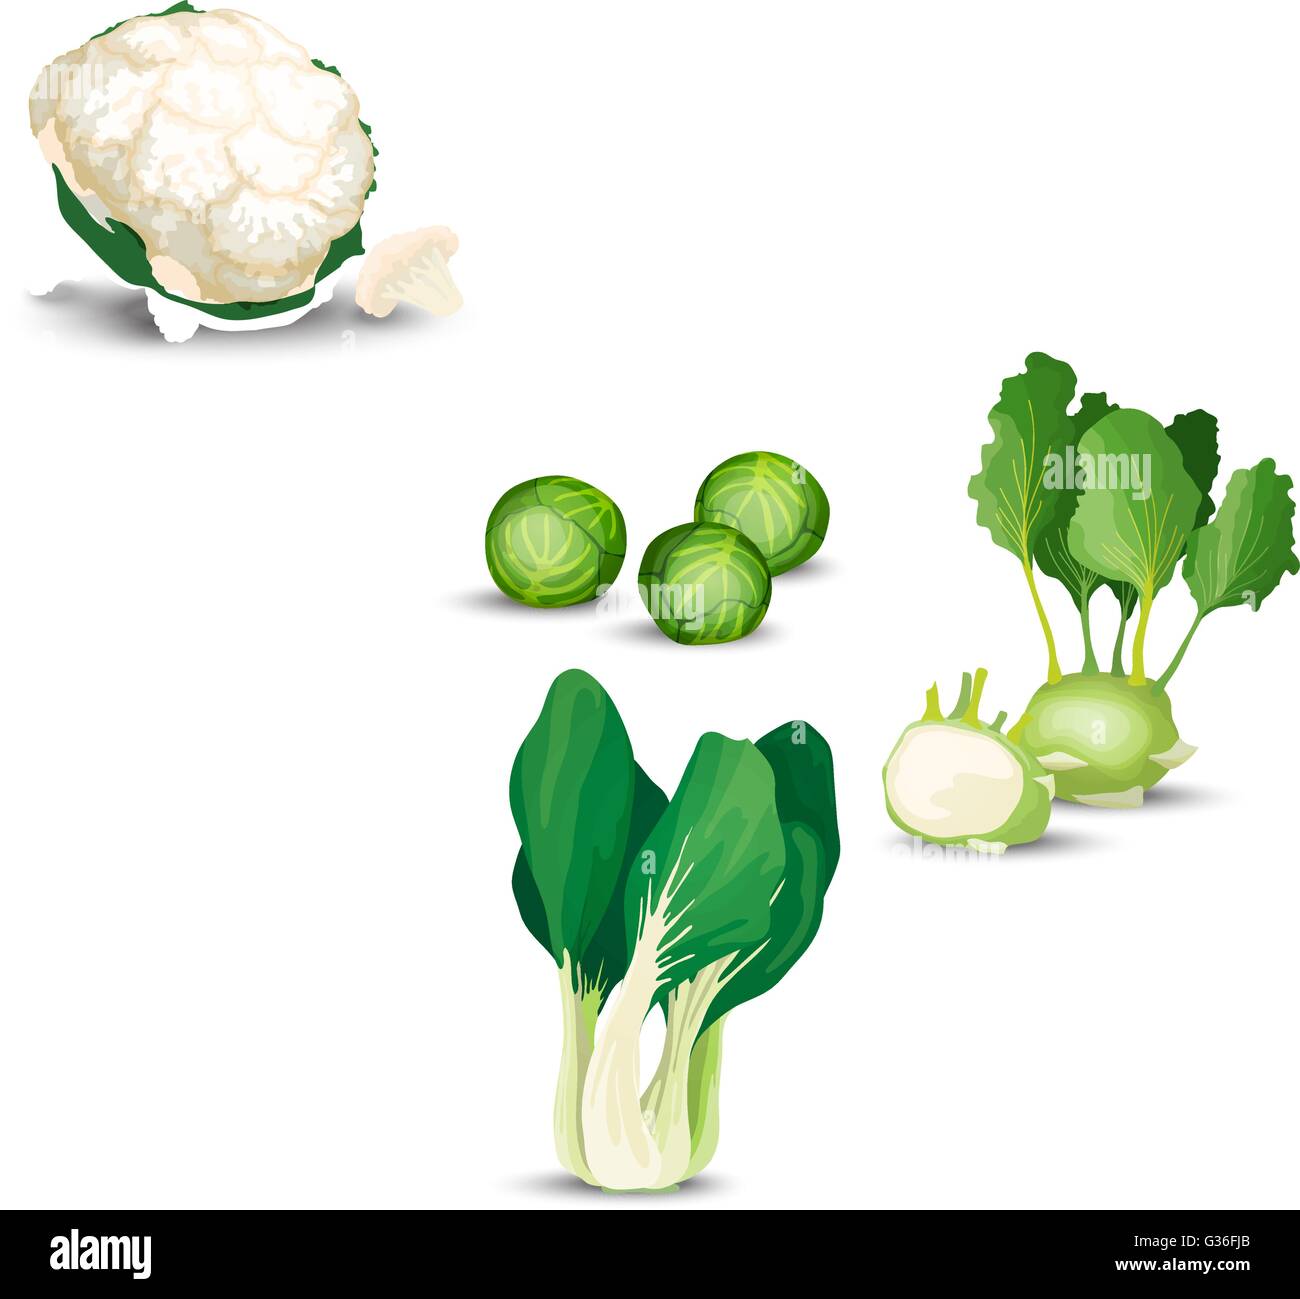 Vegetable set with cabbages Stock Vector